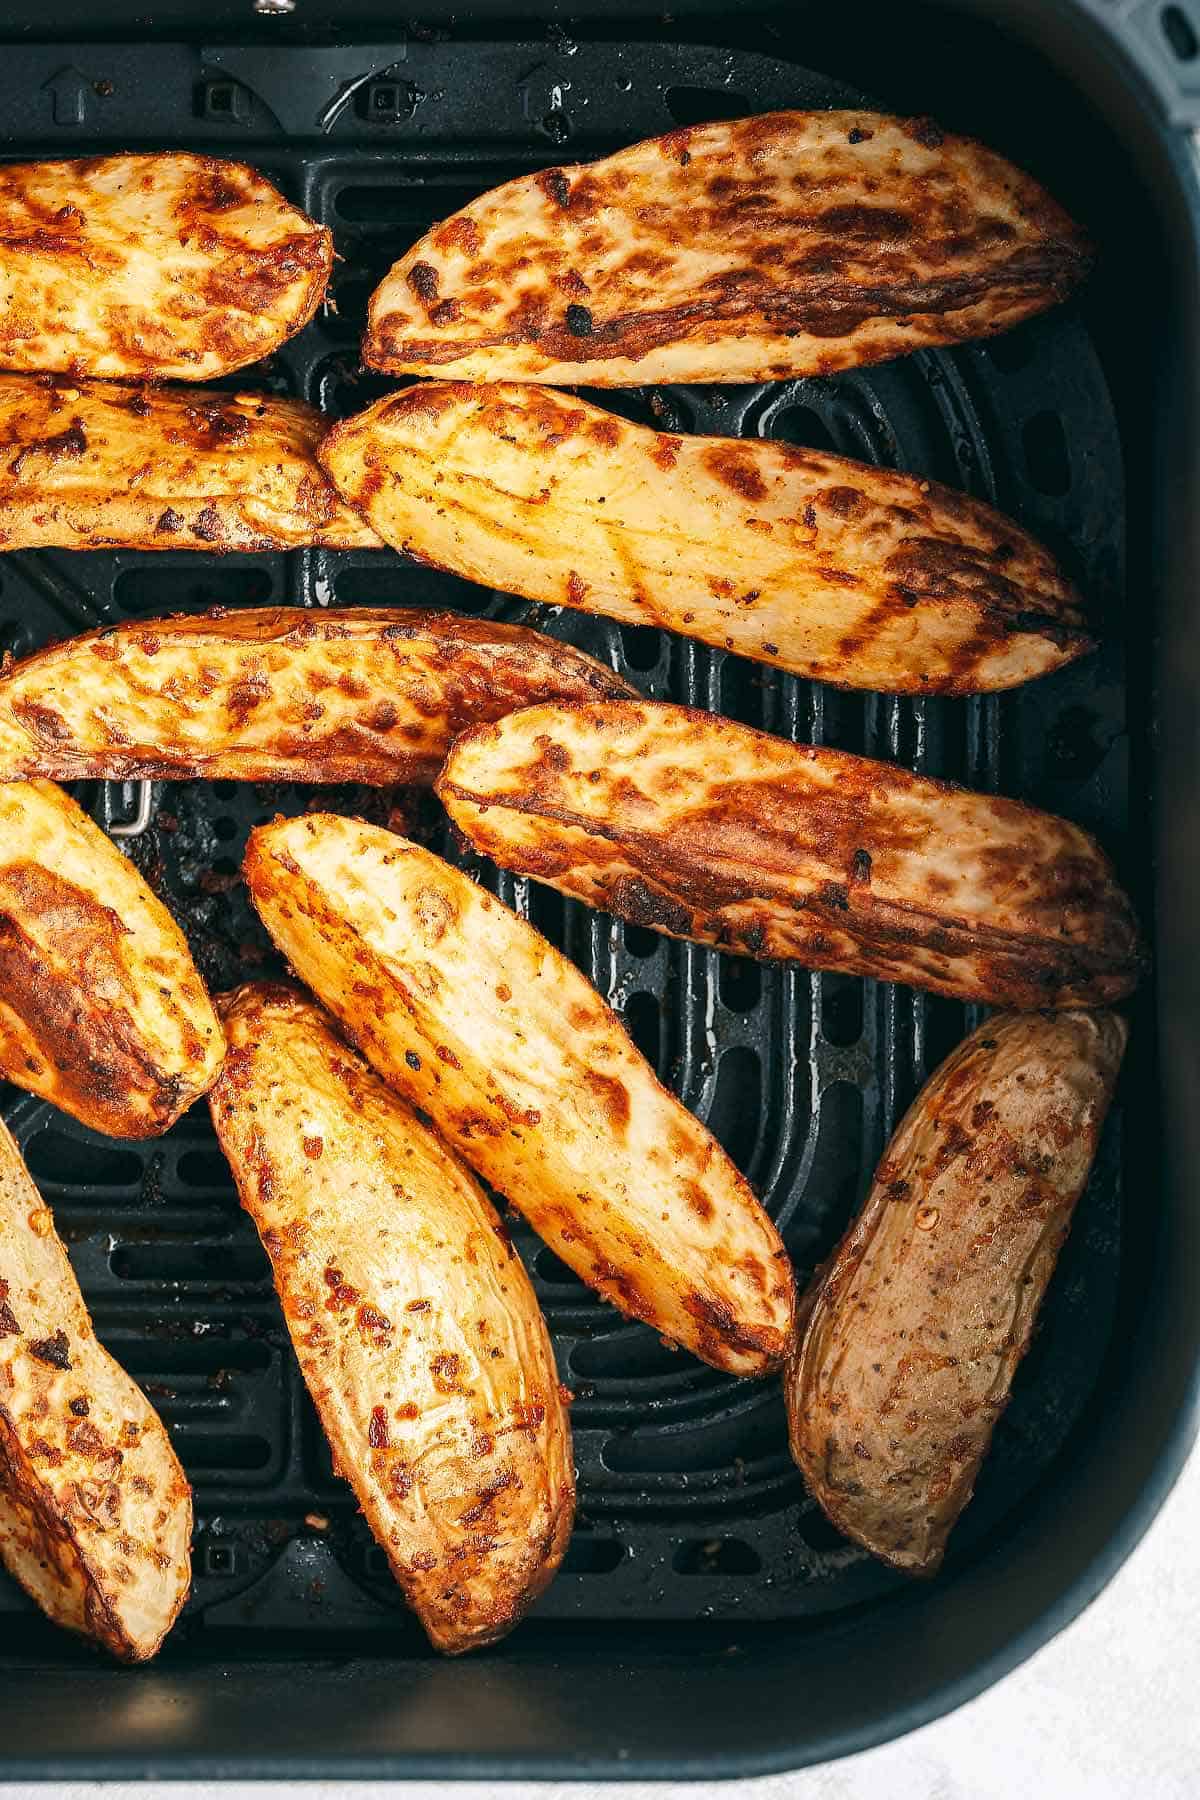 Cooked potato wedges in air fryer basket.